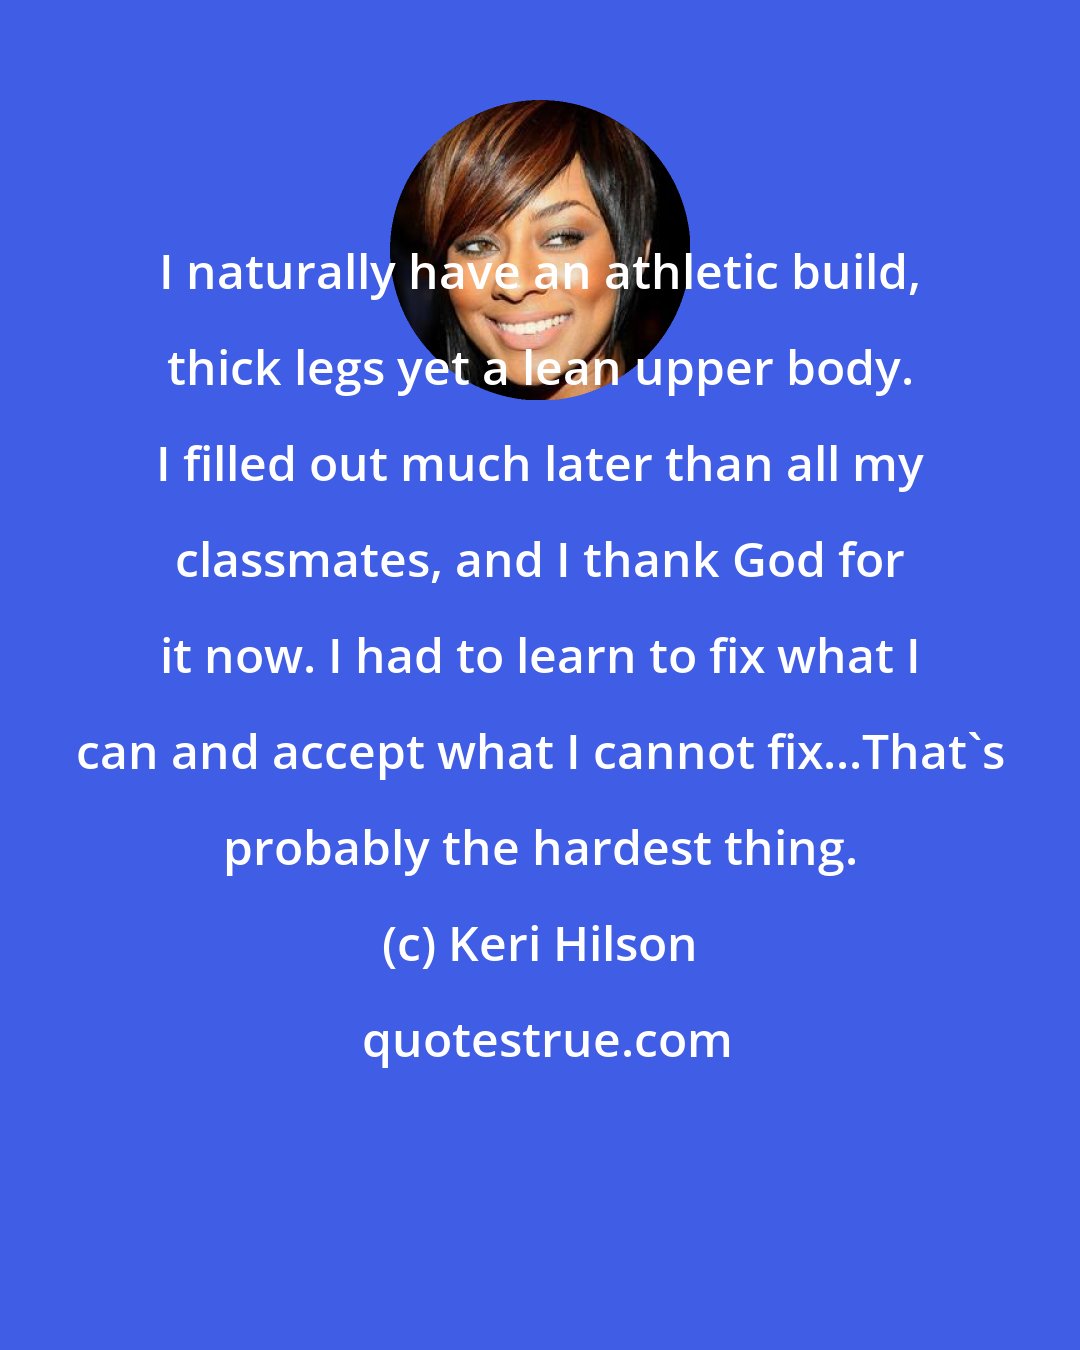 Keri Hilson: I naturally have an athletic build, thick legs yet a lean upper body. I filled out much later than all my classmates, and I thank God for it now. I had to learn to fix what I can and accept what I cannot fix...That's probably the hardest thing.